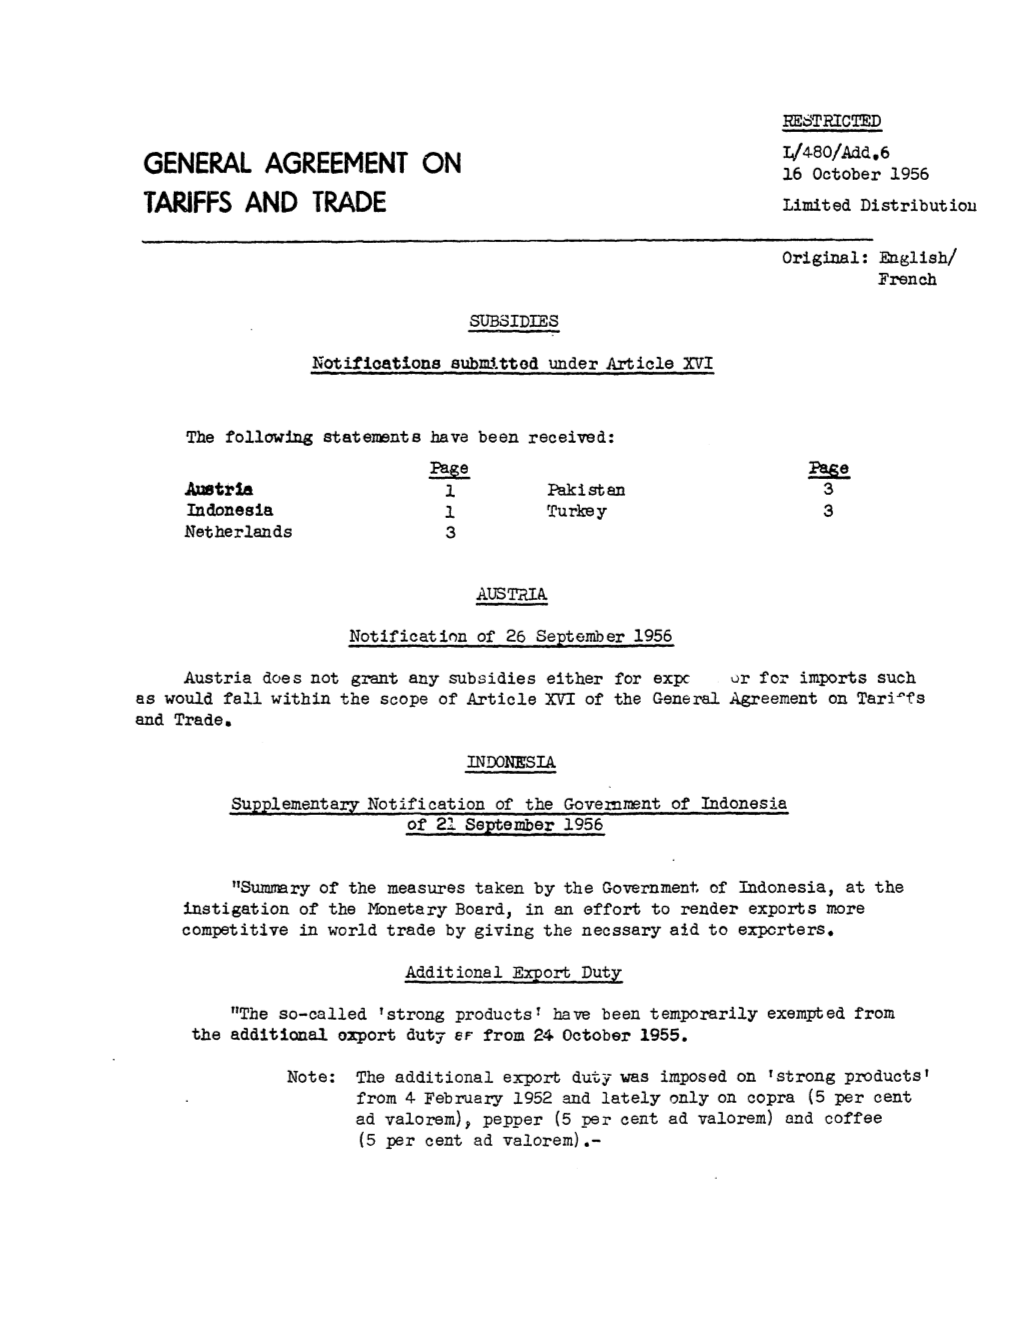 GENERAL AGREEMENT on 16 October 1956 TARIFFS and TRADE Limited Distribution